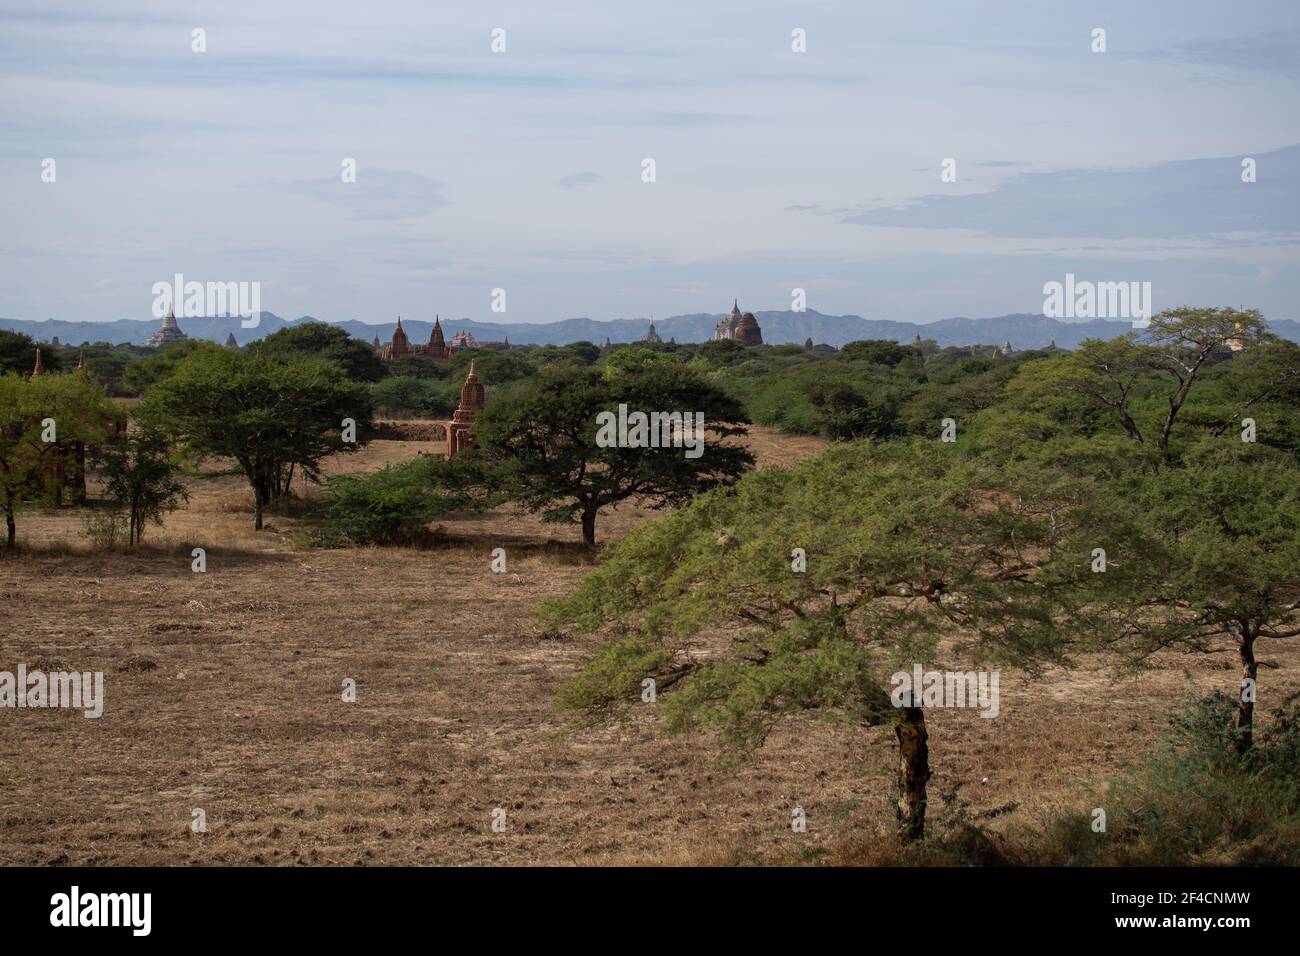 BAGAN, NYAUNG-U, MYANMAR - 3 JANUARY 2020: Several old and historical temple pagodas and green vegetation in the distance from an open dry grass and h Stock Photo